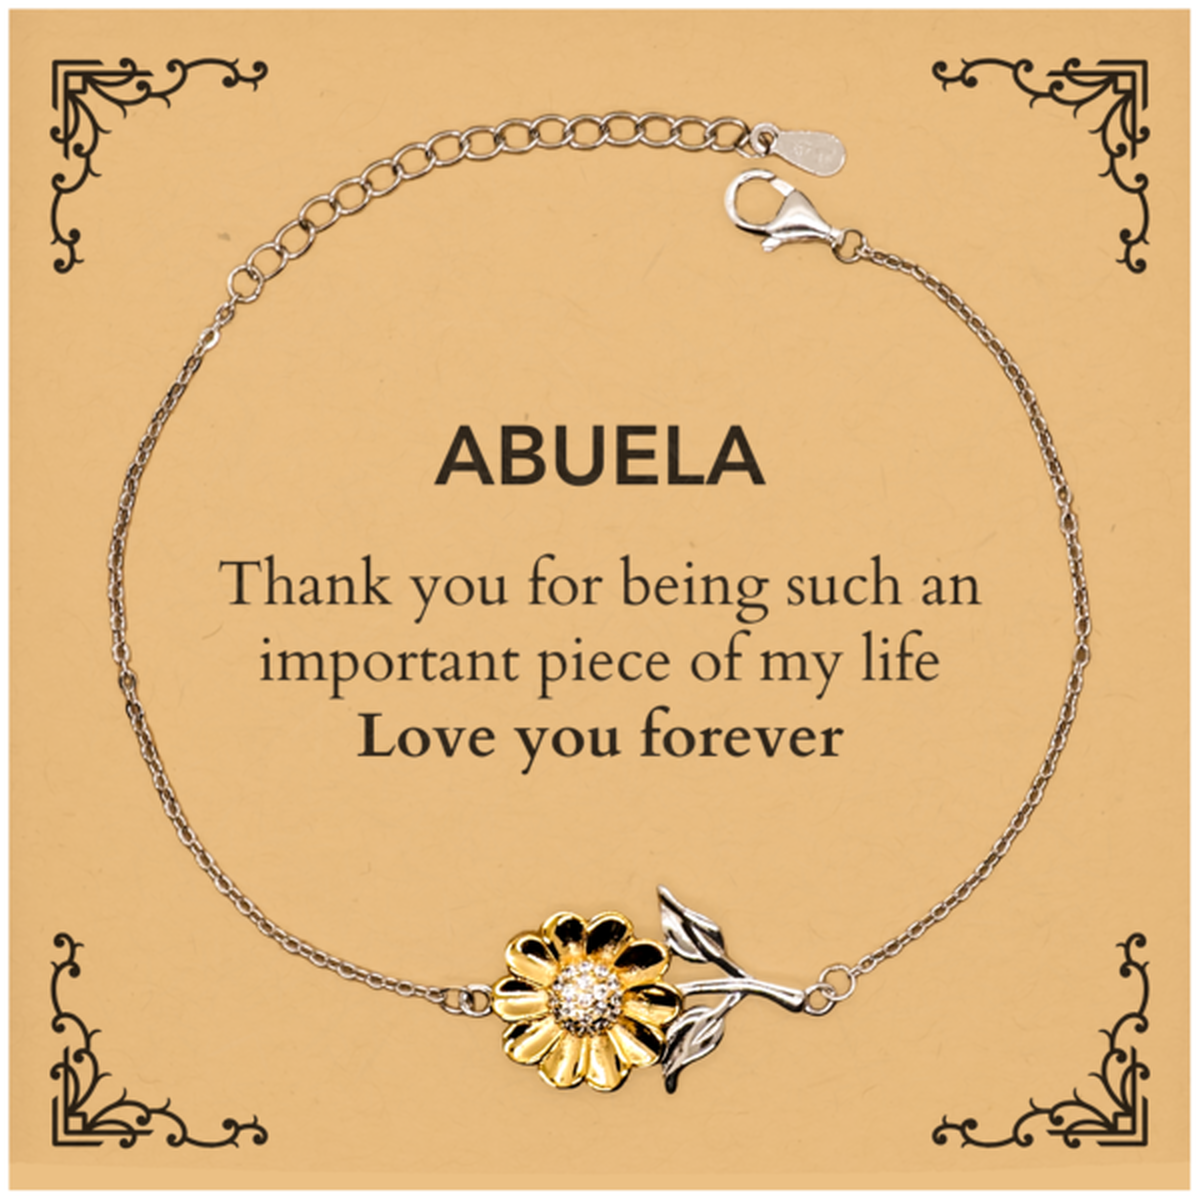 Appropriate Abuela Sunflower Bracelet Epic Birthday Gifts for Abuela Thank you for being such an important piece of my life Abuela Christmas Mothers Fathers Day